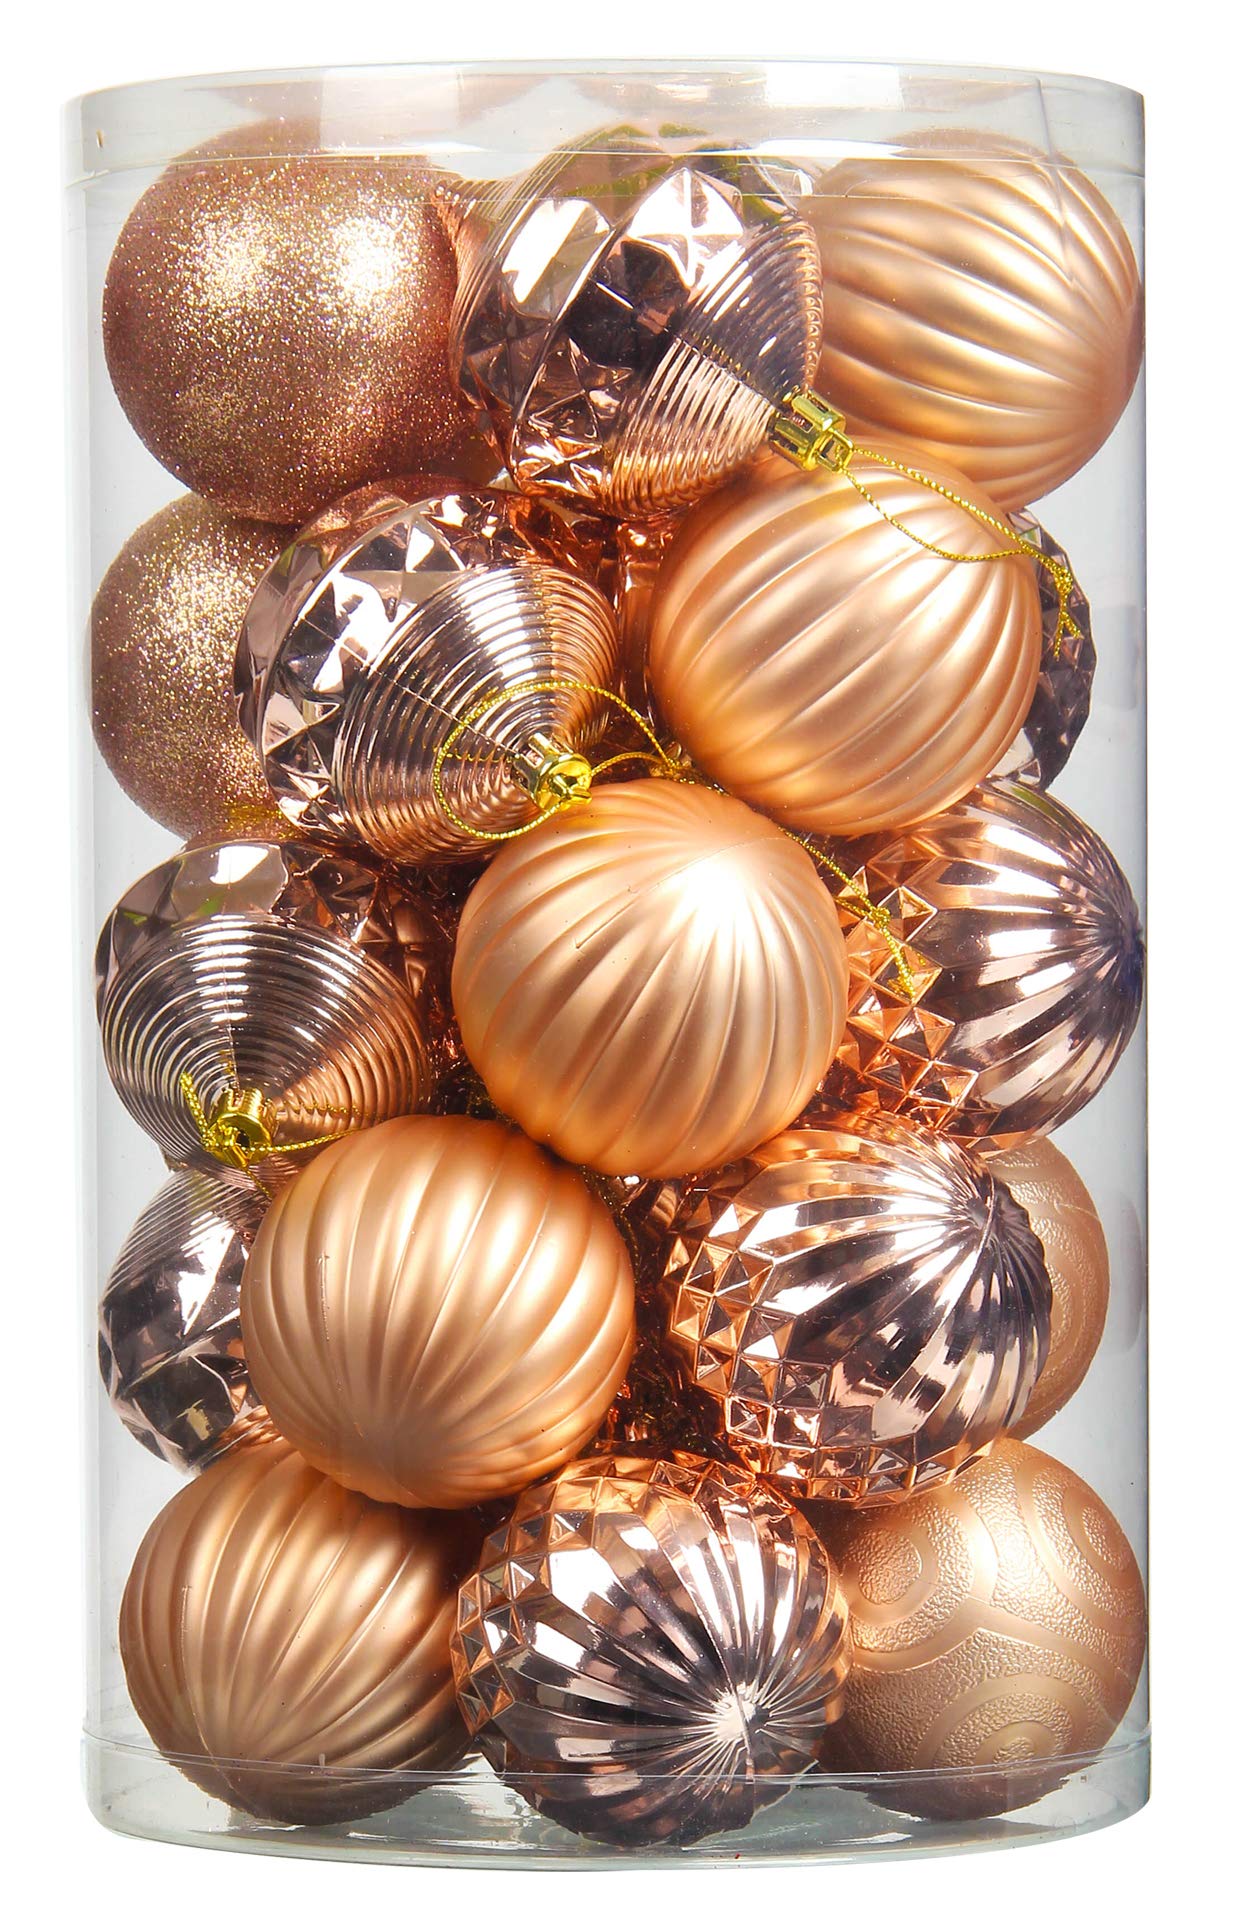 Jusdreen 31pcs Christmas Balls Ornaments for Xmas Tree Shatterproof Christmas Tree Hanging Balls Decoration for Holiday Party Ba